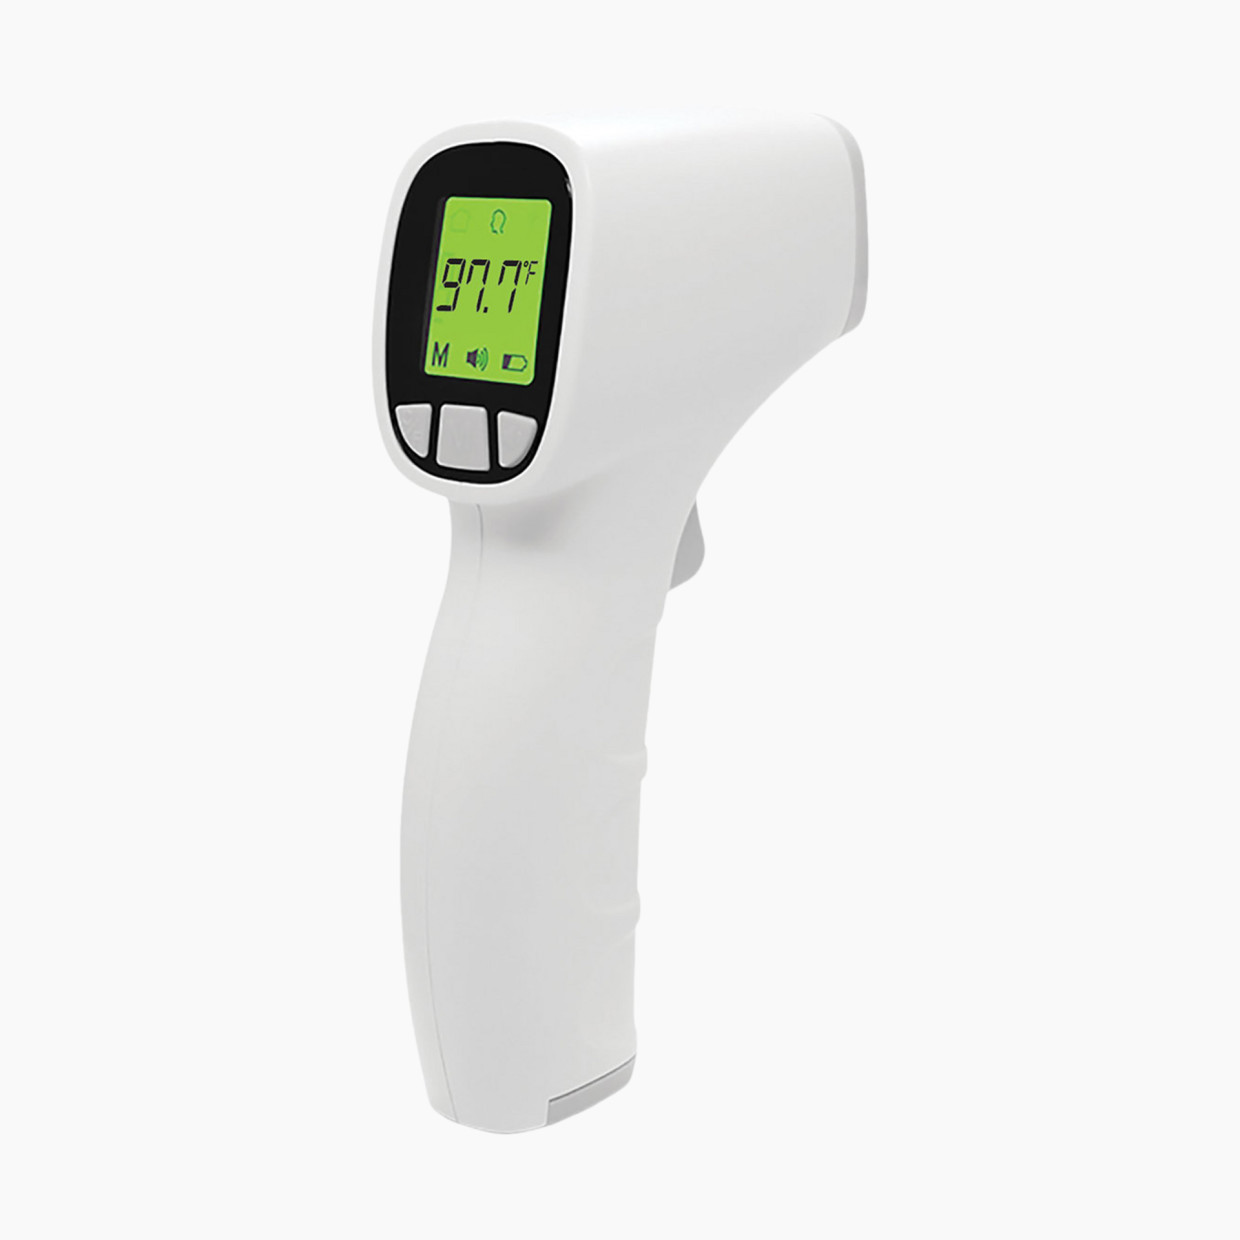 Dreambaby Rapid Response Infrared Thermometer.